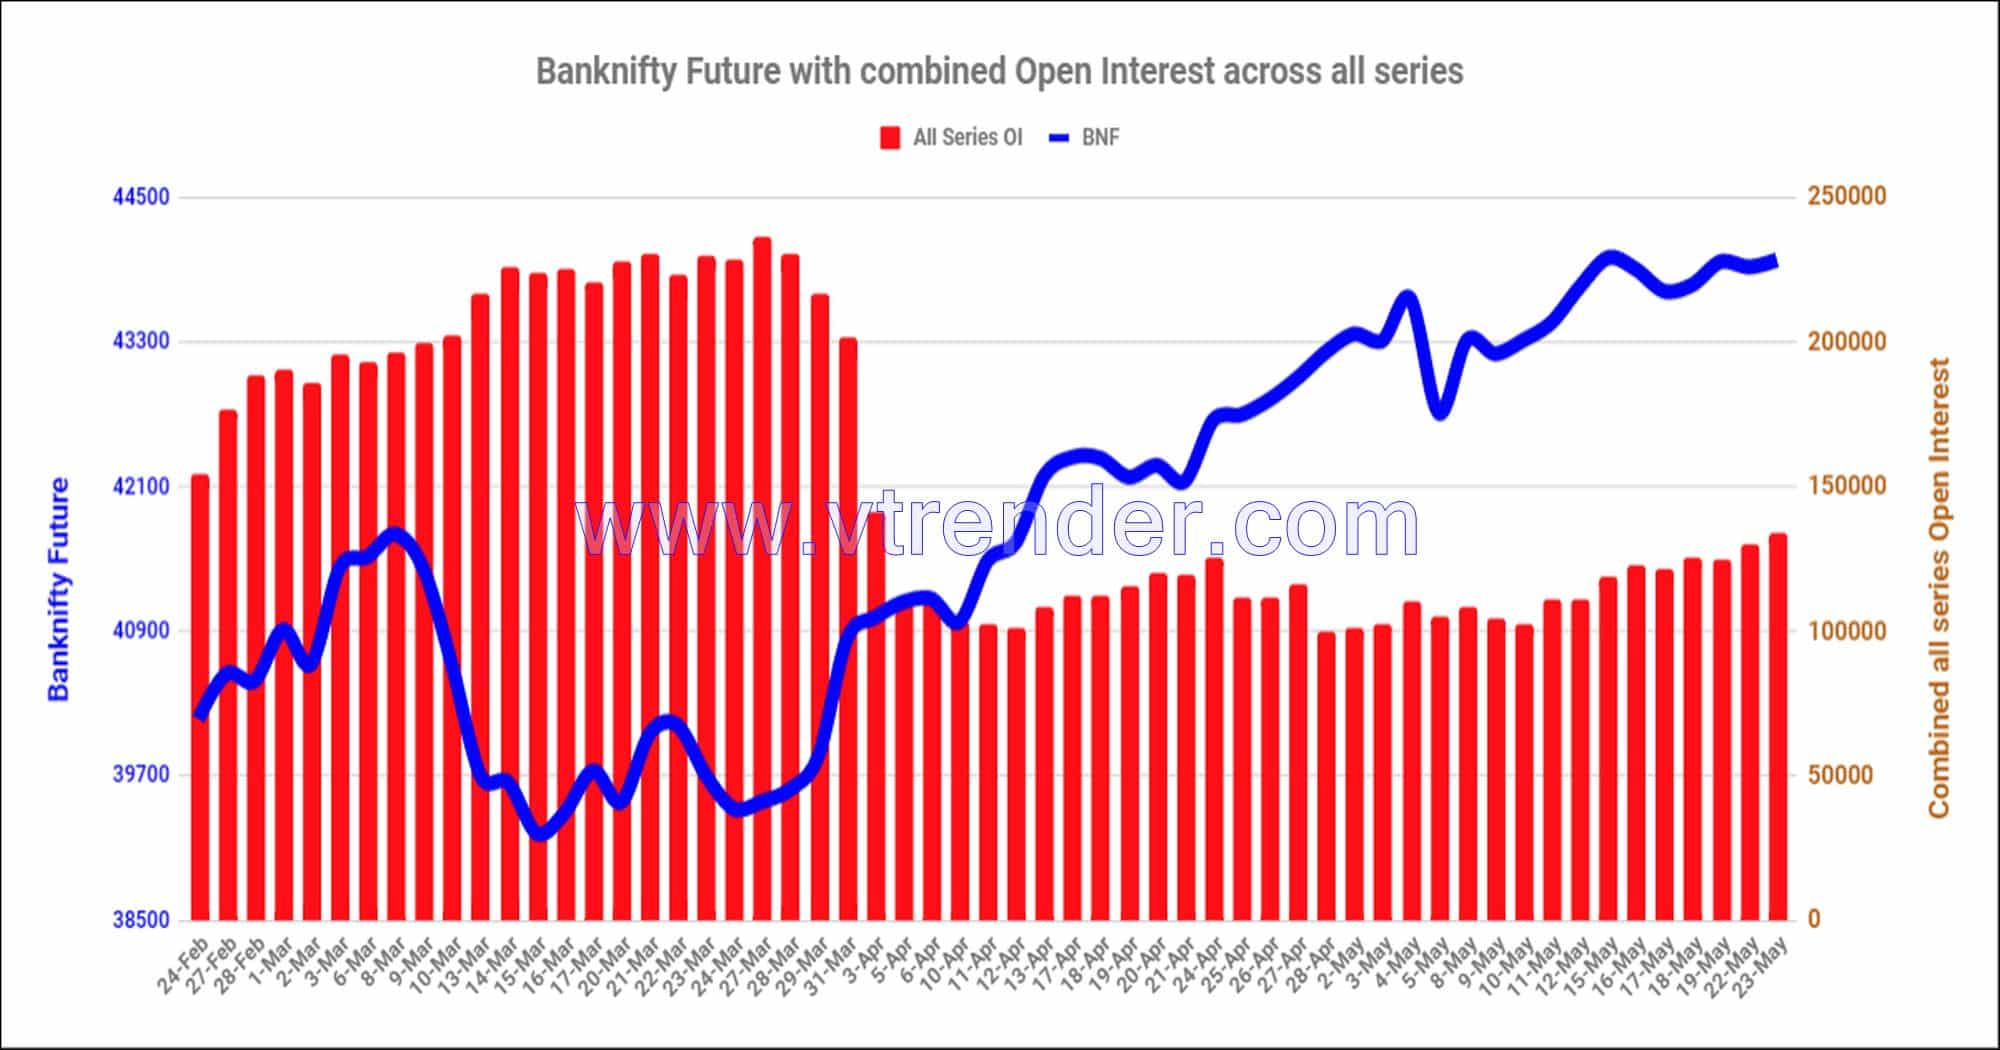 Bnf23May Nifty And Banknifty Futures With All Series Combined Open Interest – 23Rd May 2023 Banknifty, Nifty, Open Interest